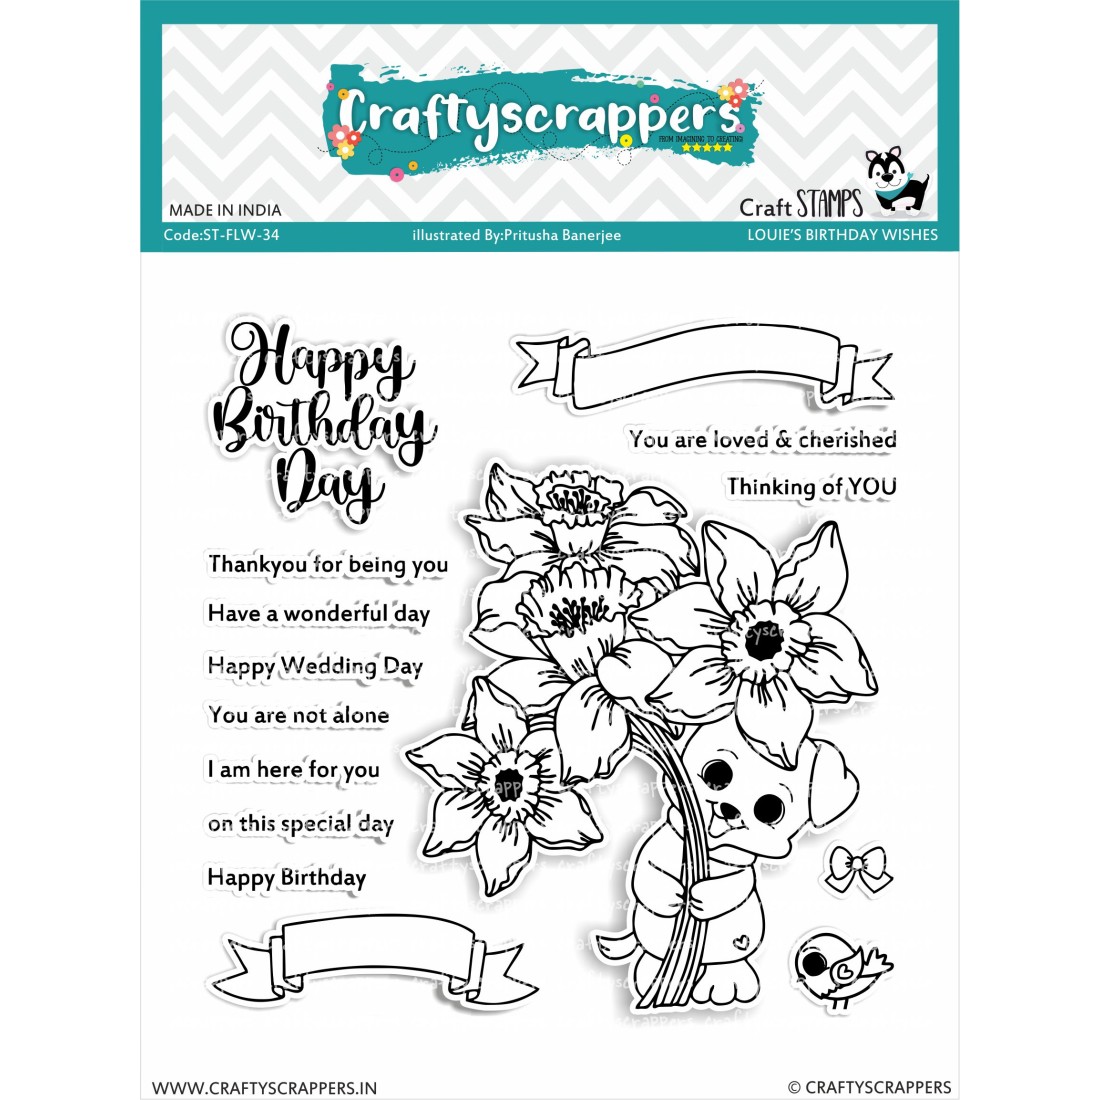 Craftyscrappers Stamps- LOUIE'S BIRTHDAY WISHES